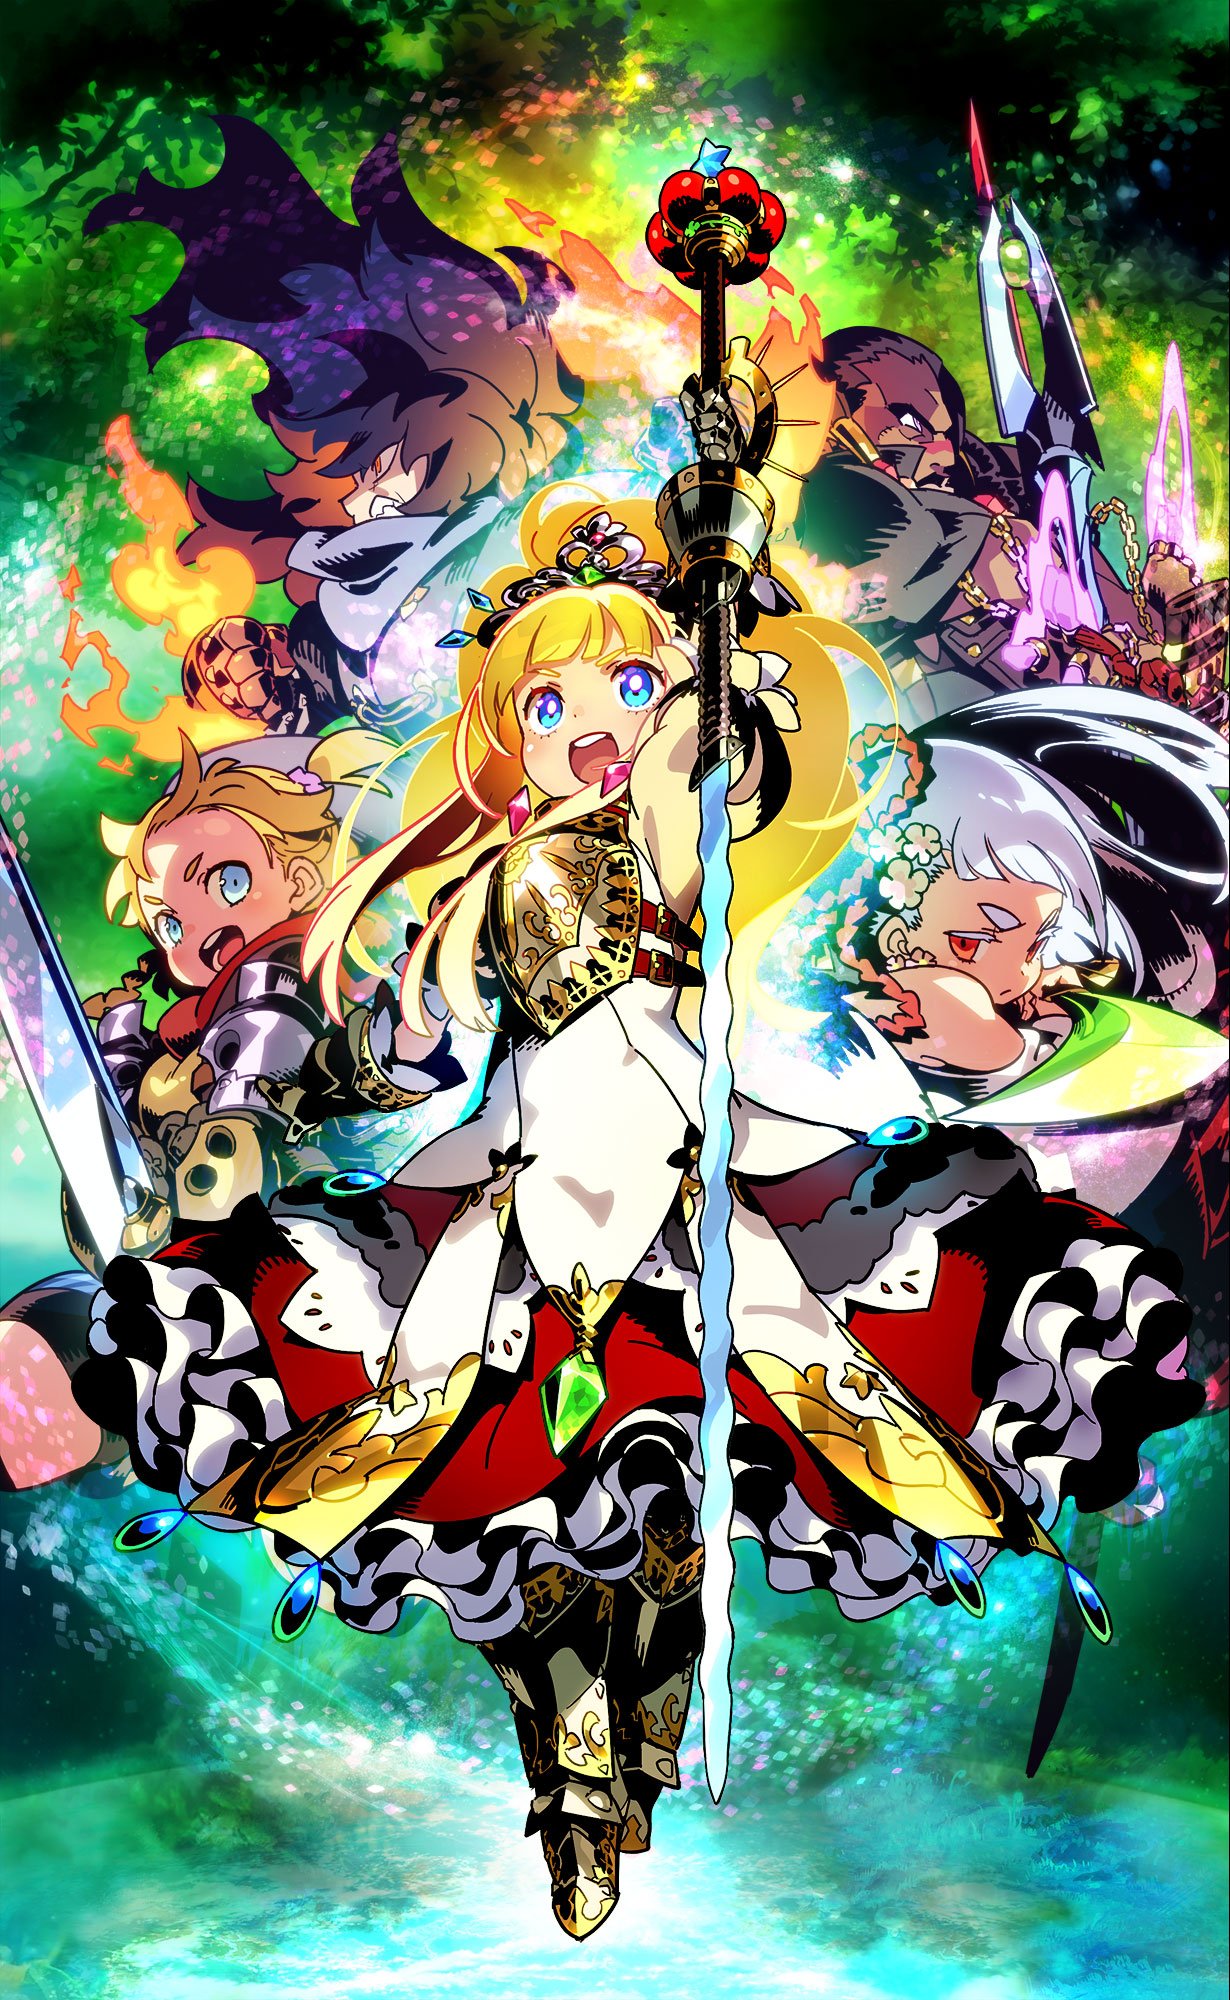 Etrian Odyssey Origins Collection to Release This June on the Switch and PC